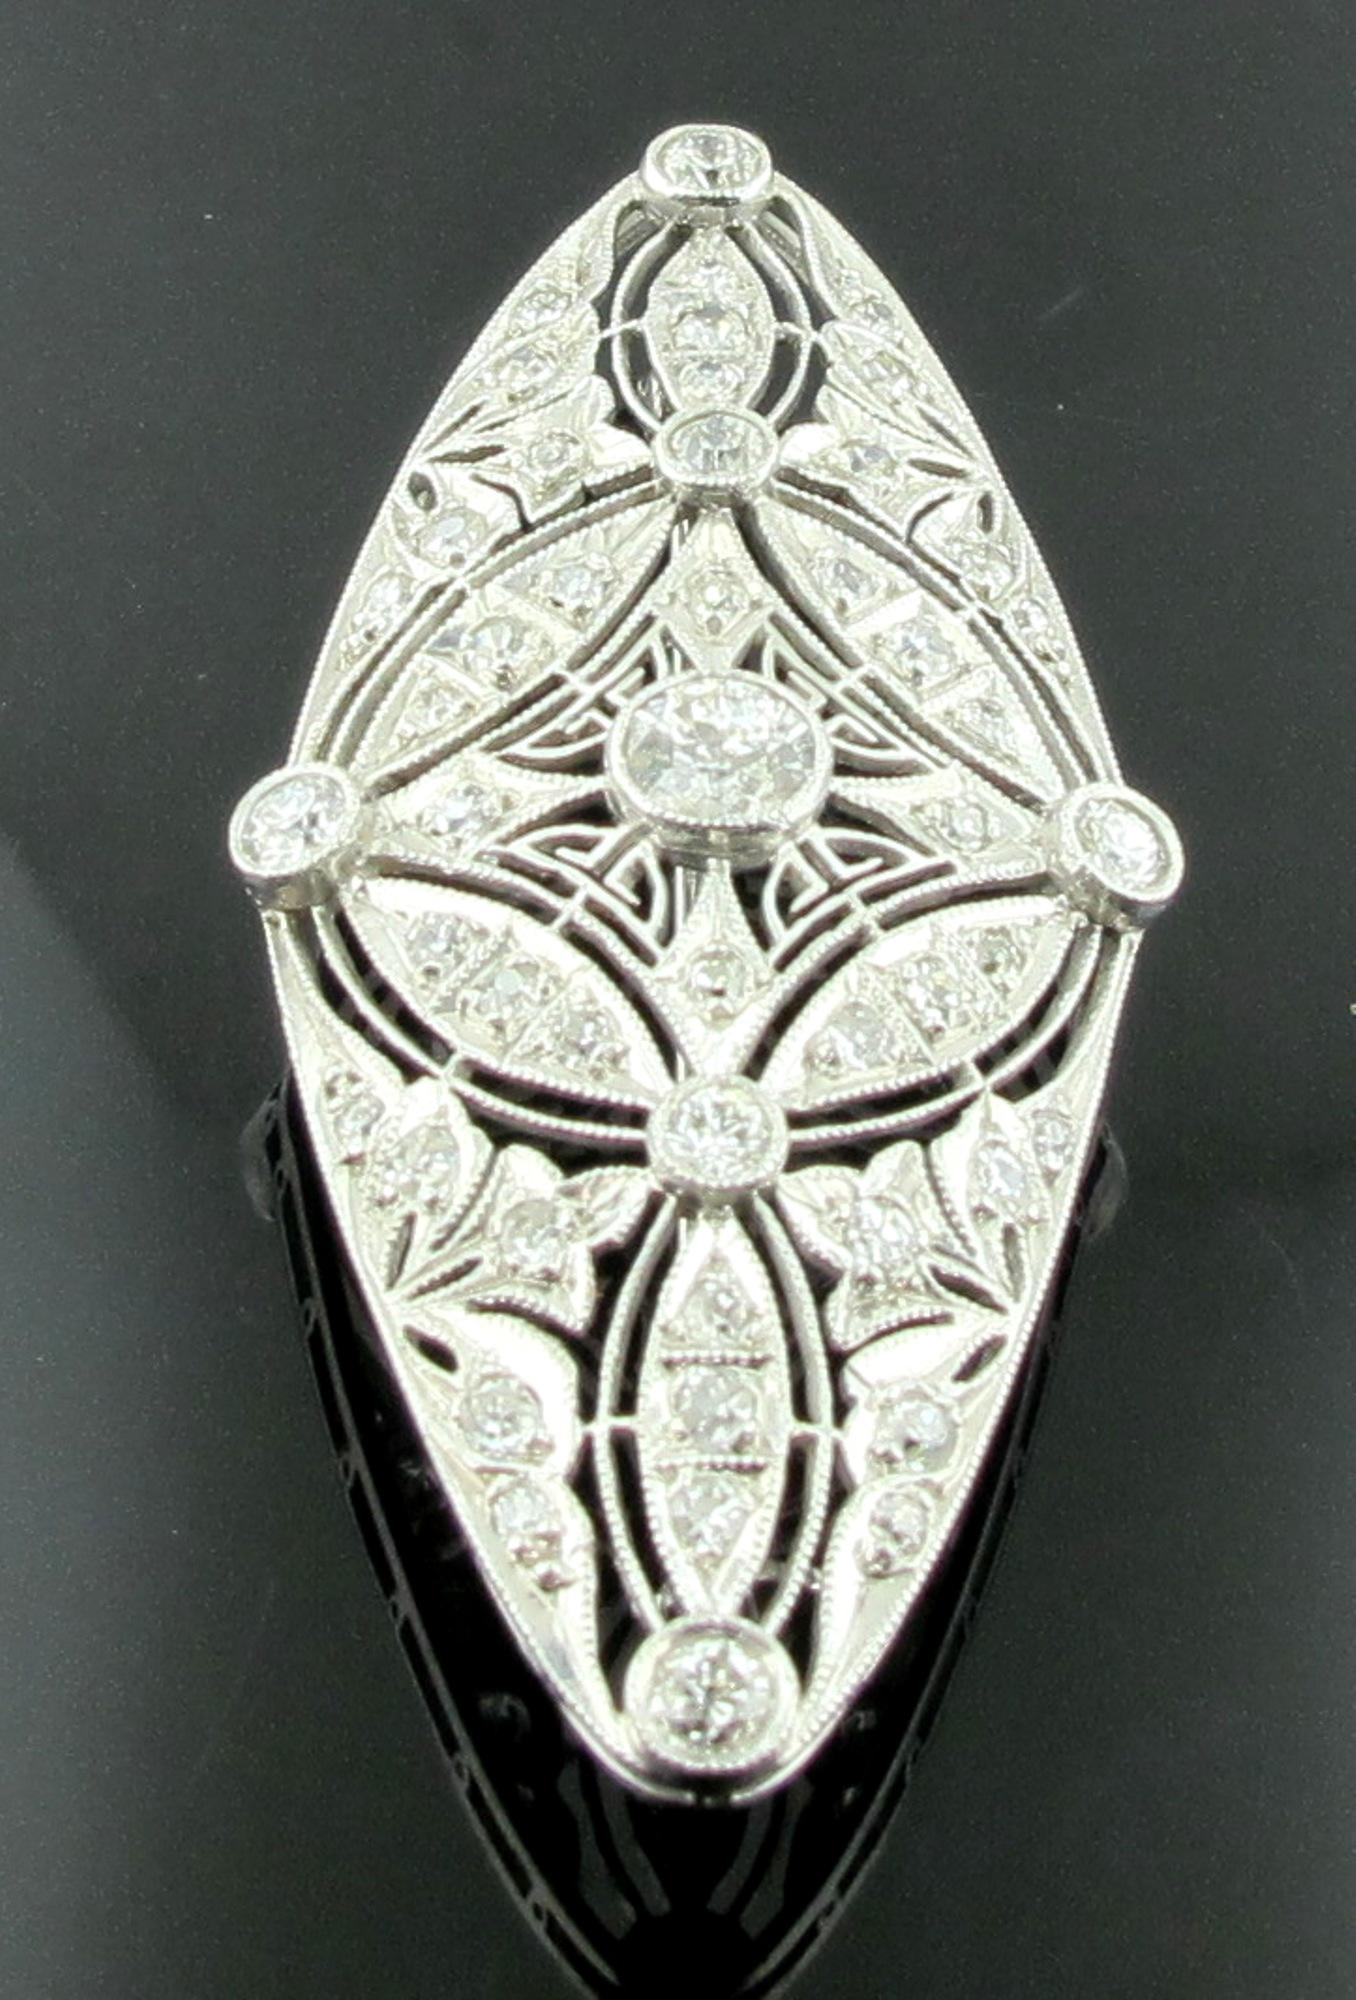 Art Deco 18 karat white gold diamond brooch with pendant capabilities.  Center diamond is 0.40 carats and the total diamond weight is 2.30 carats.